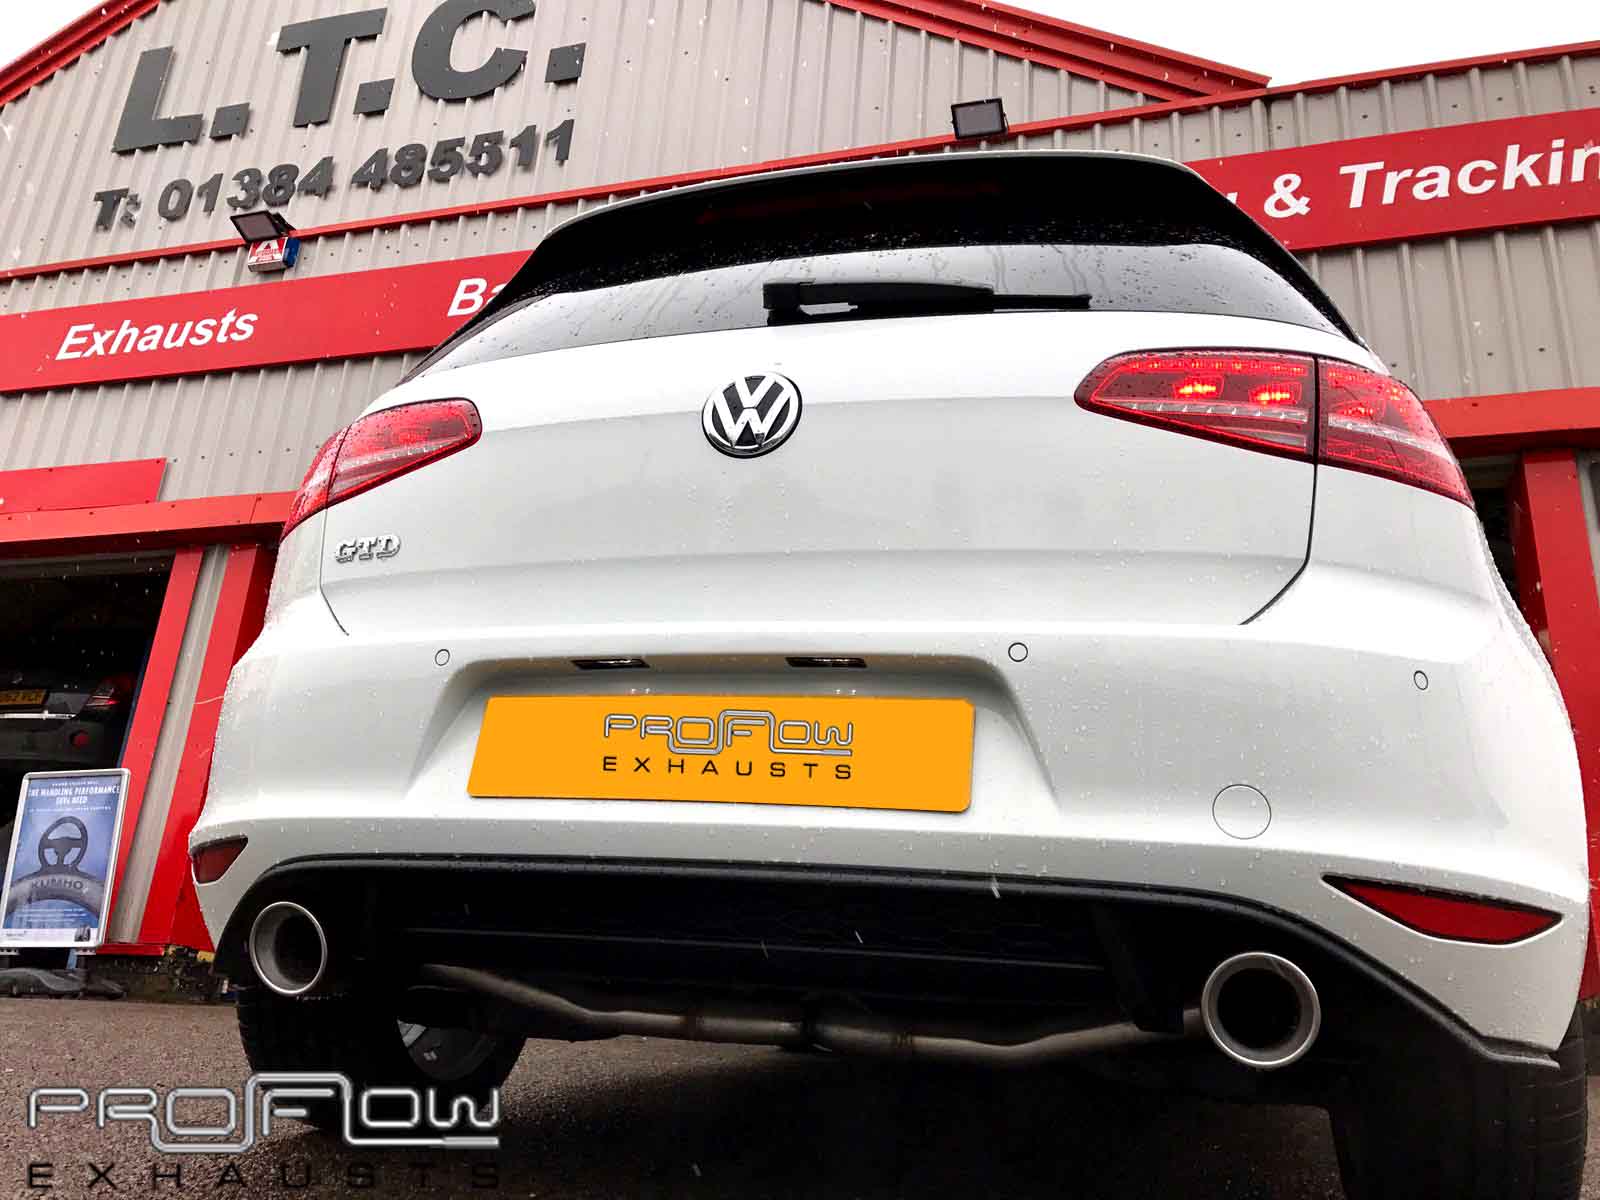 VW Golf Fitted With Stainless Steel Dual With Exit With Single Tailpipes Proflow Exhausts (1) Copy